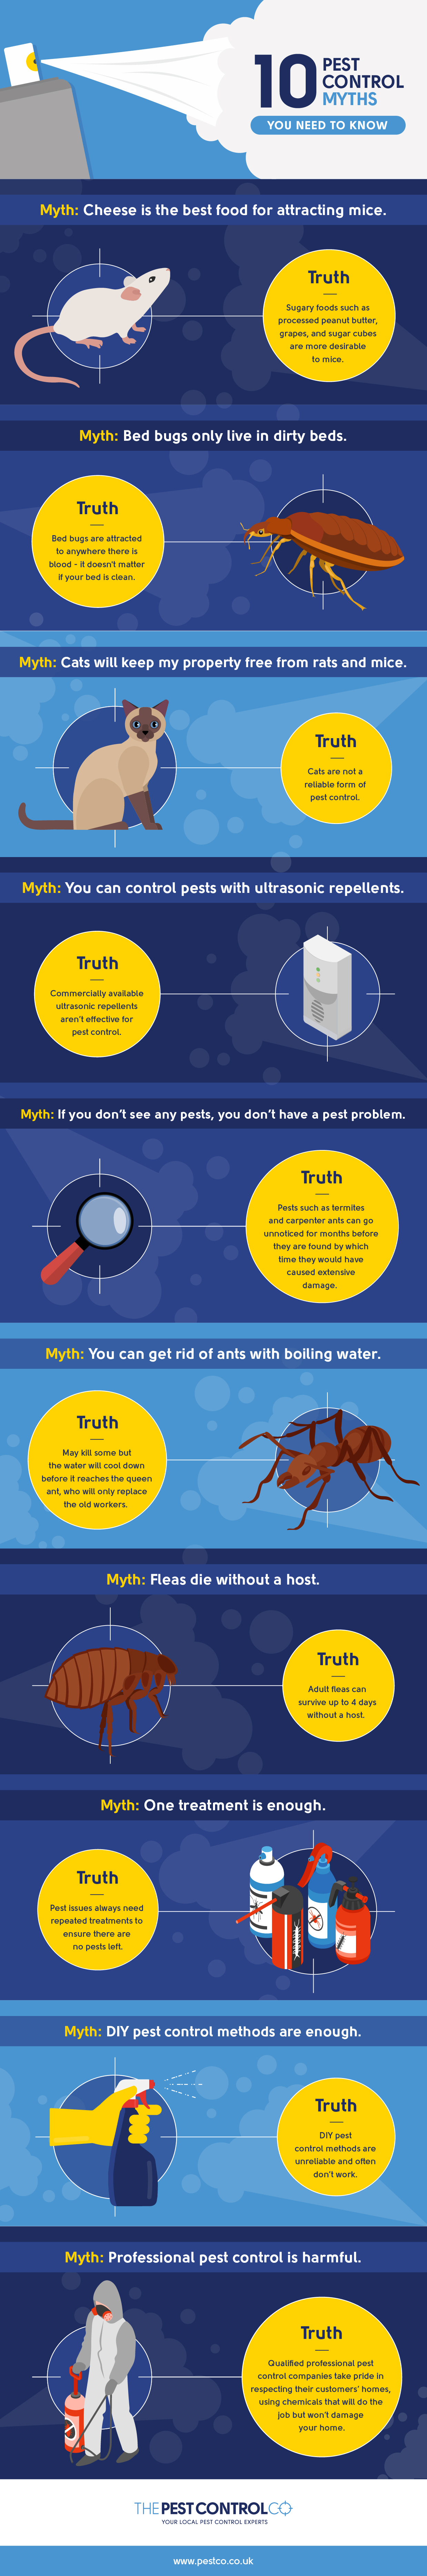 infographic of pest control myths